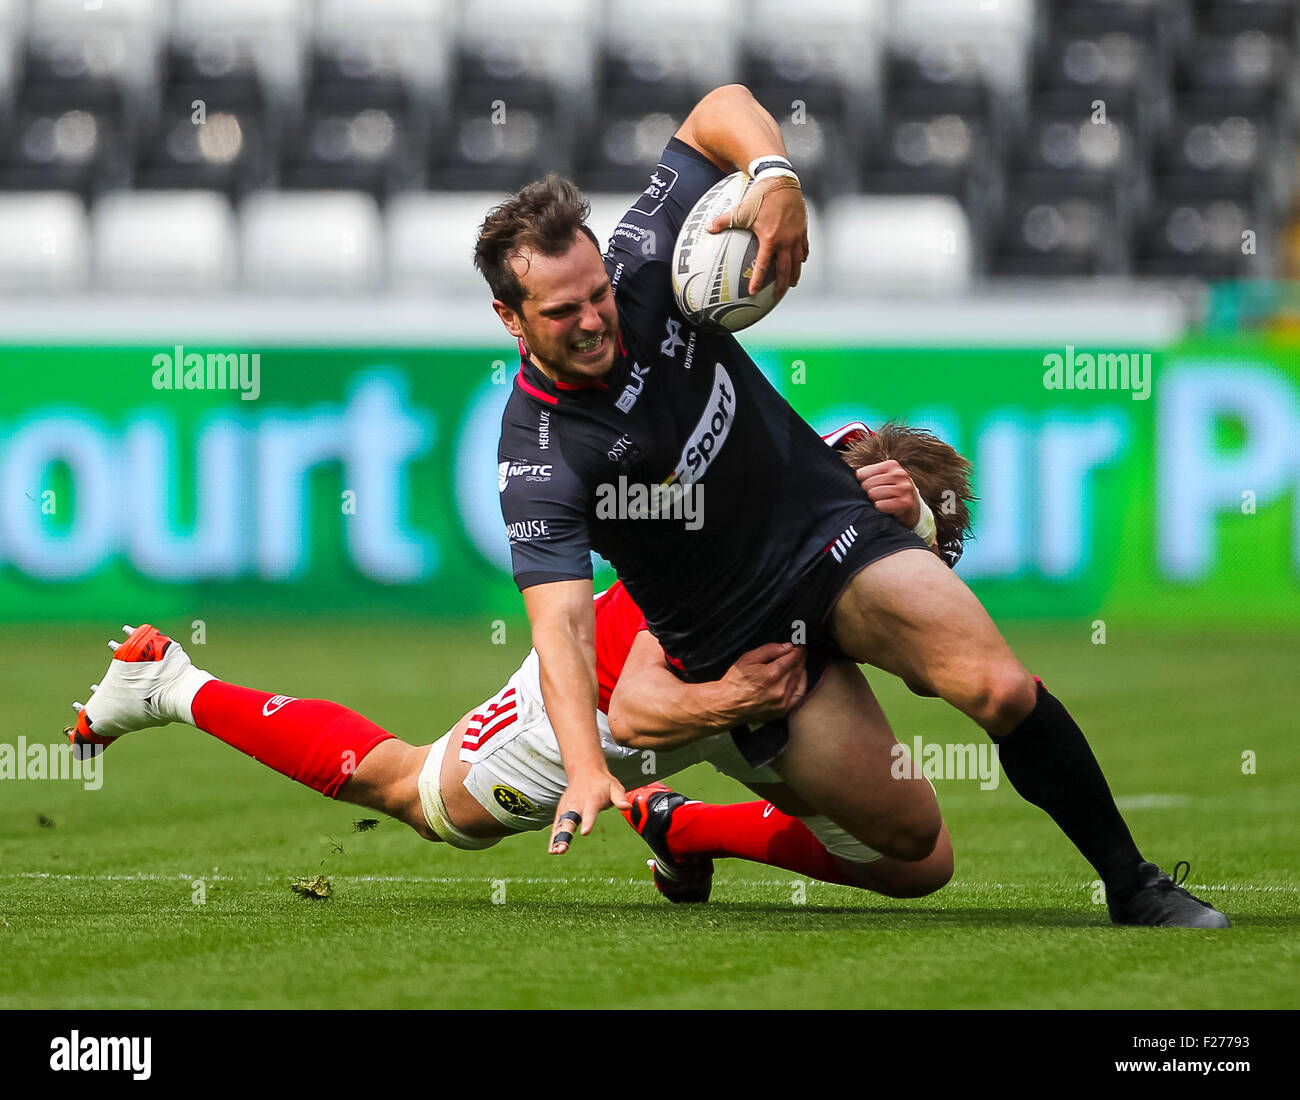 Swansea, Wales. 13th Sep, 2015. Guinness Pro12. Ospreys versus Munster Rugby. Ospreys Dan Evans gets tackled by Munster's Dave Foley. © Action Plus Sports/Alamy Live News Stock Photo